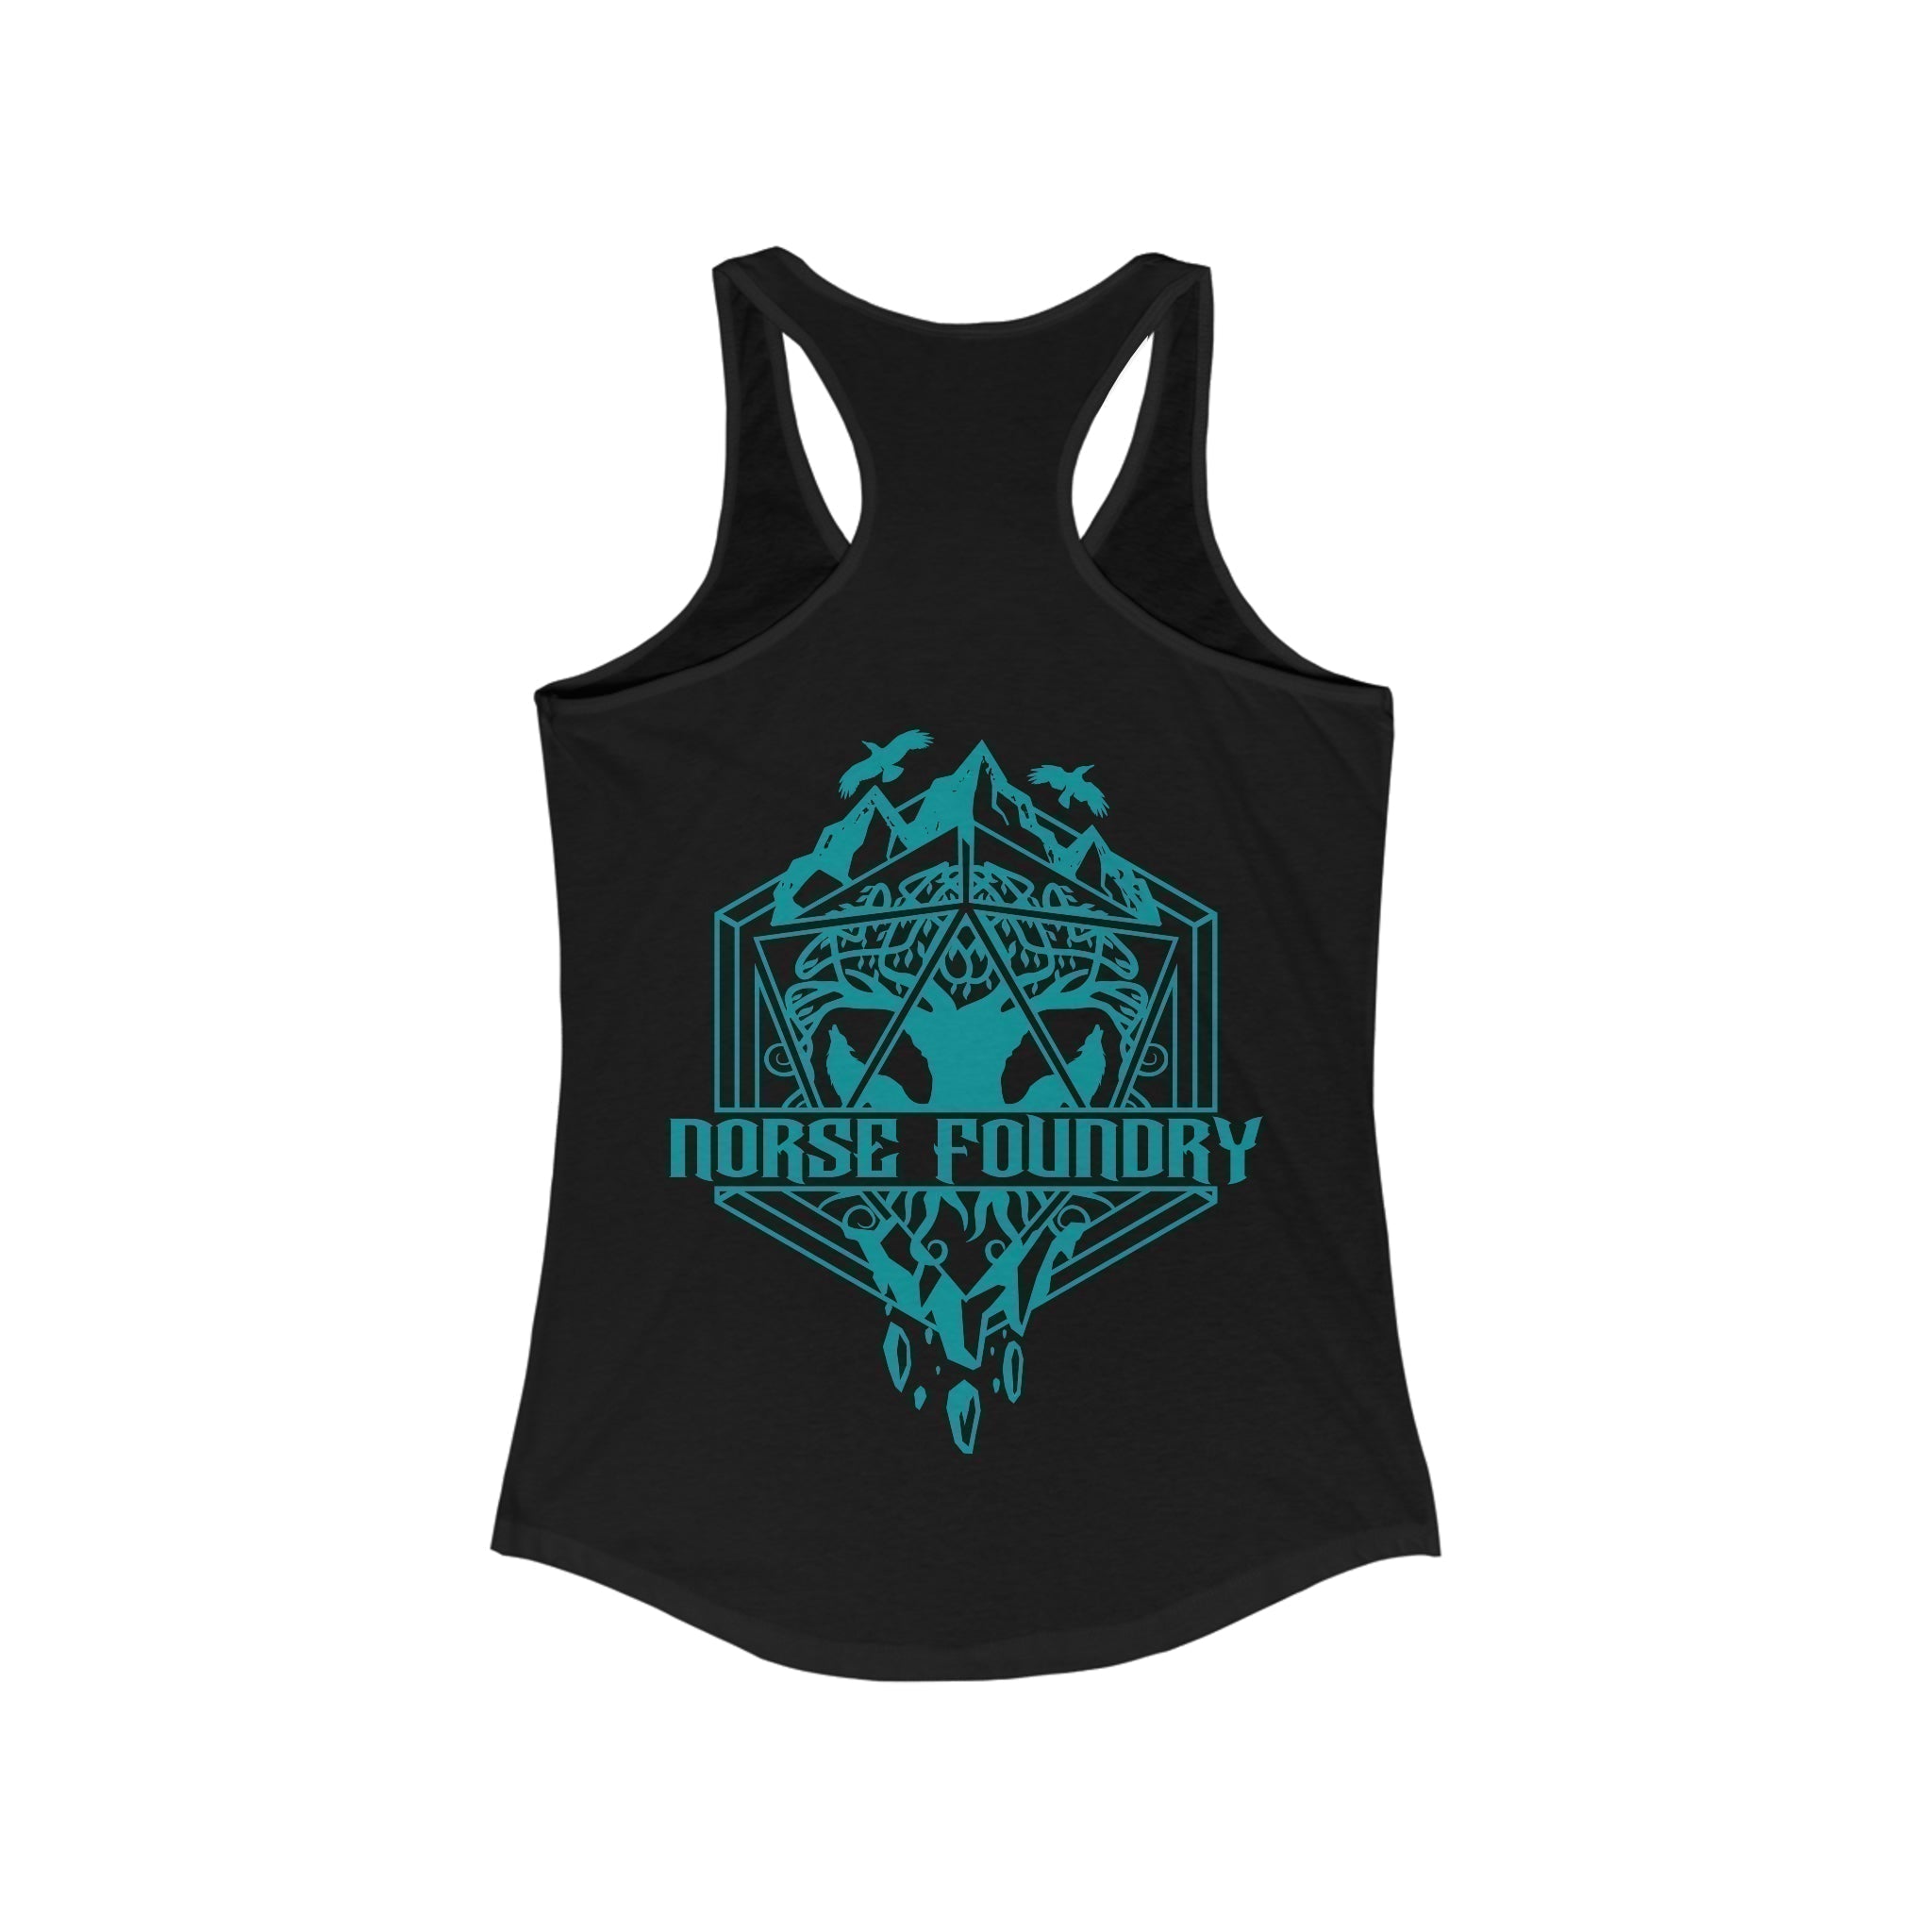 Roll for Adventure - Norse Foundry Women's Tank Top - 19669635553404840206_Parent